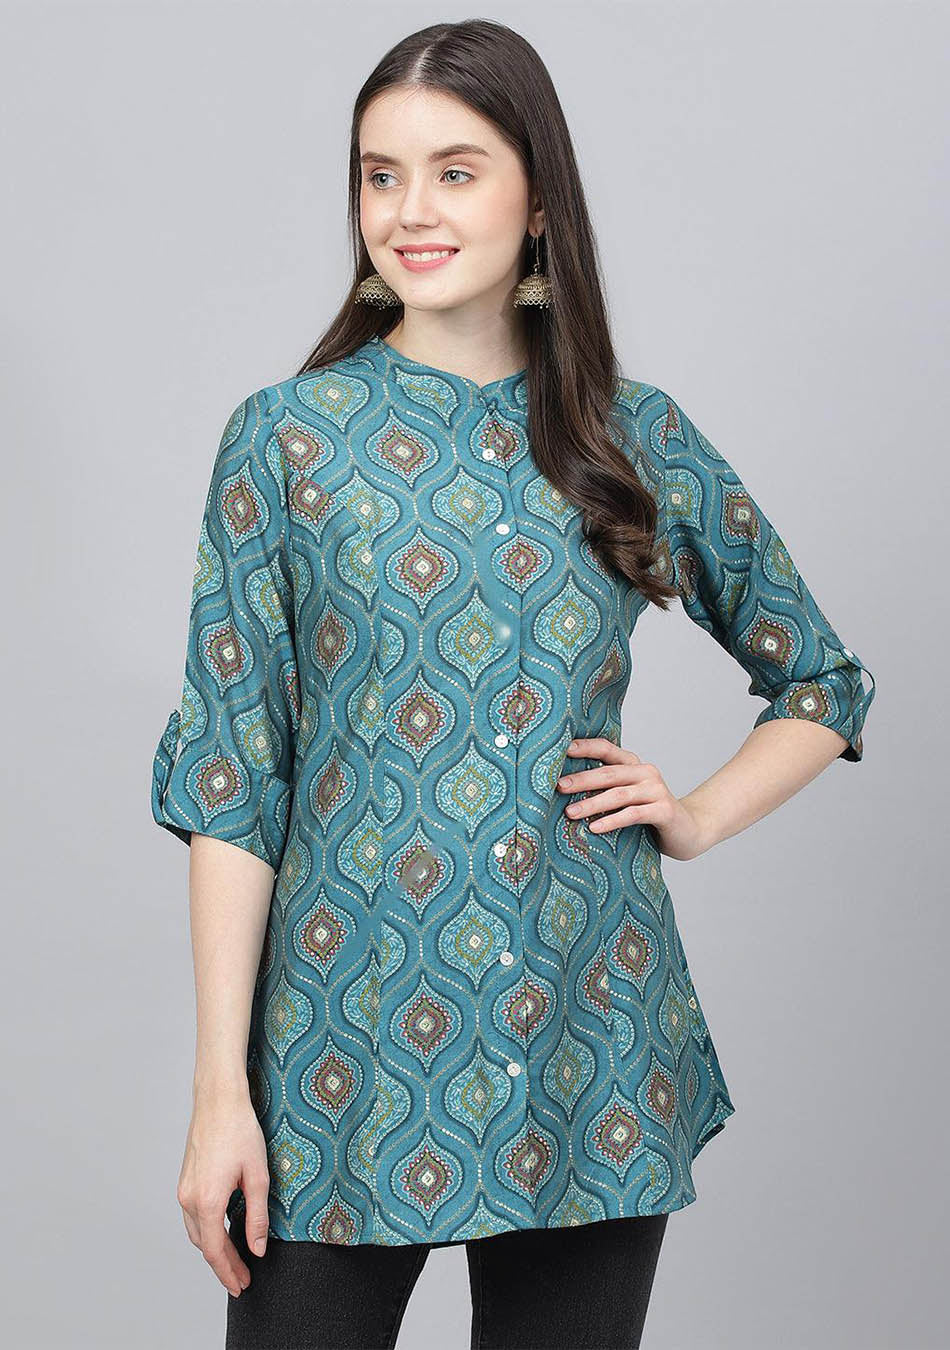 Teal Blue Motif Printed Modal A-Line Shirts Style Top